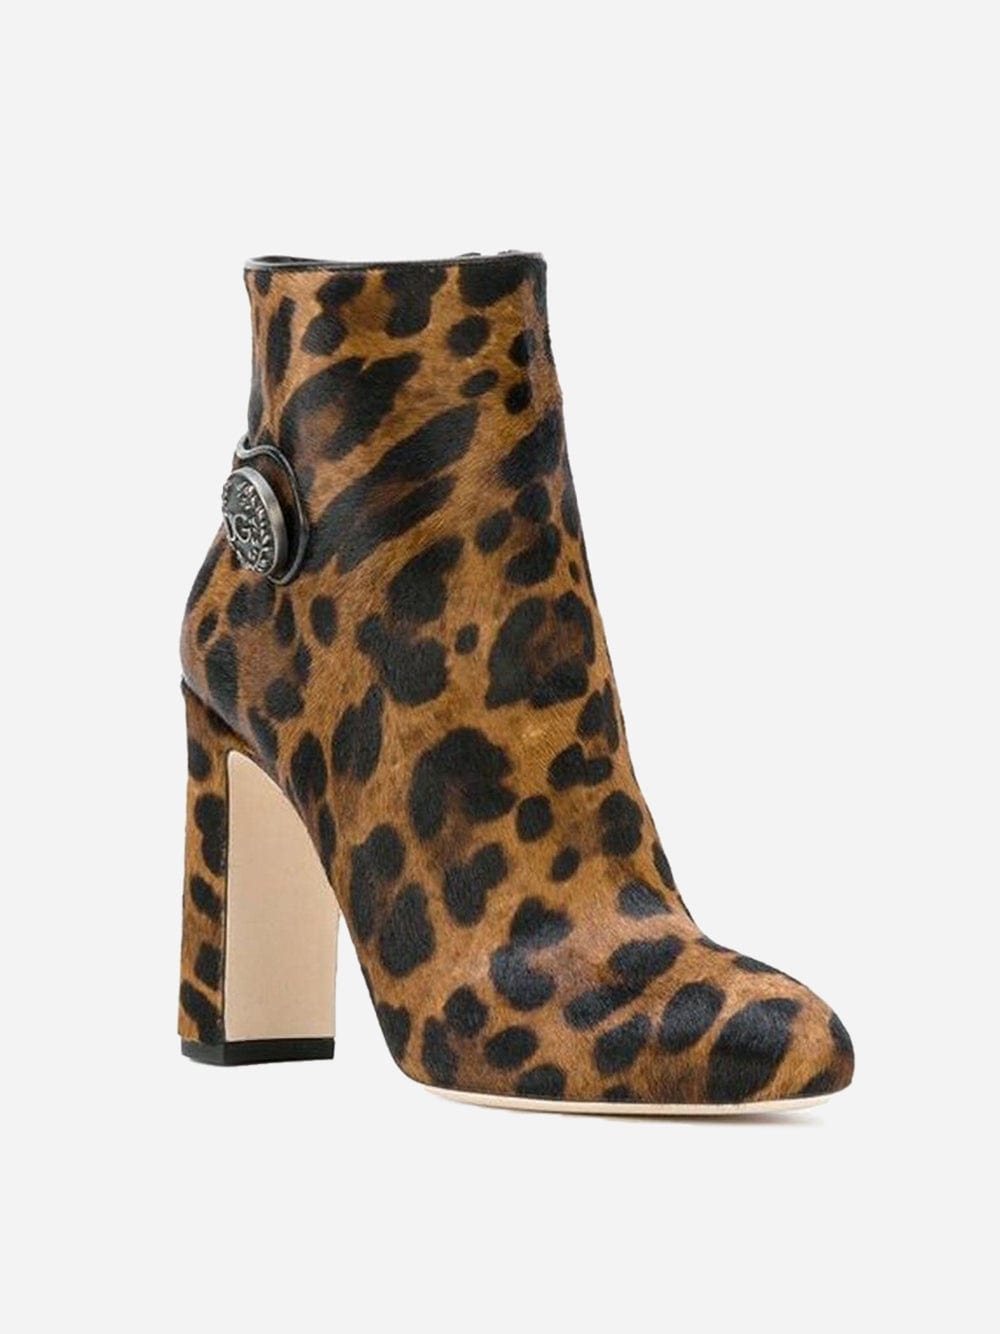 Dolce & Gabbana Vally Leopard-Print Ankle Boots